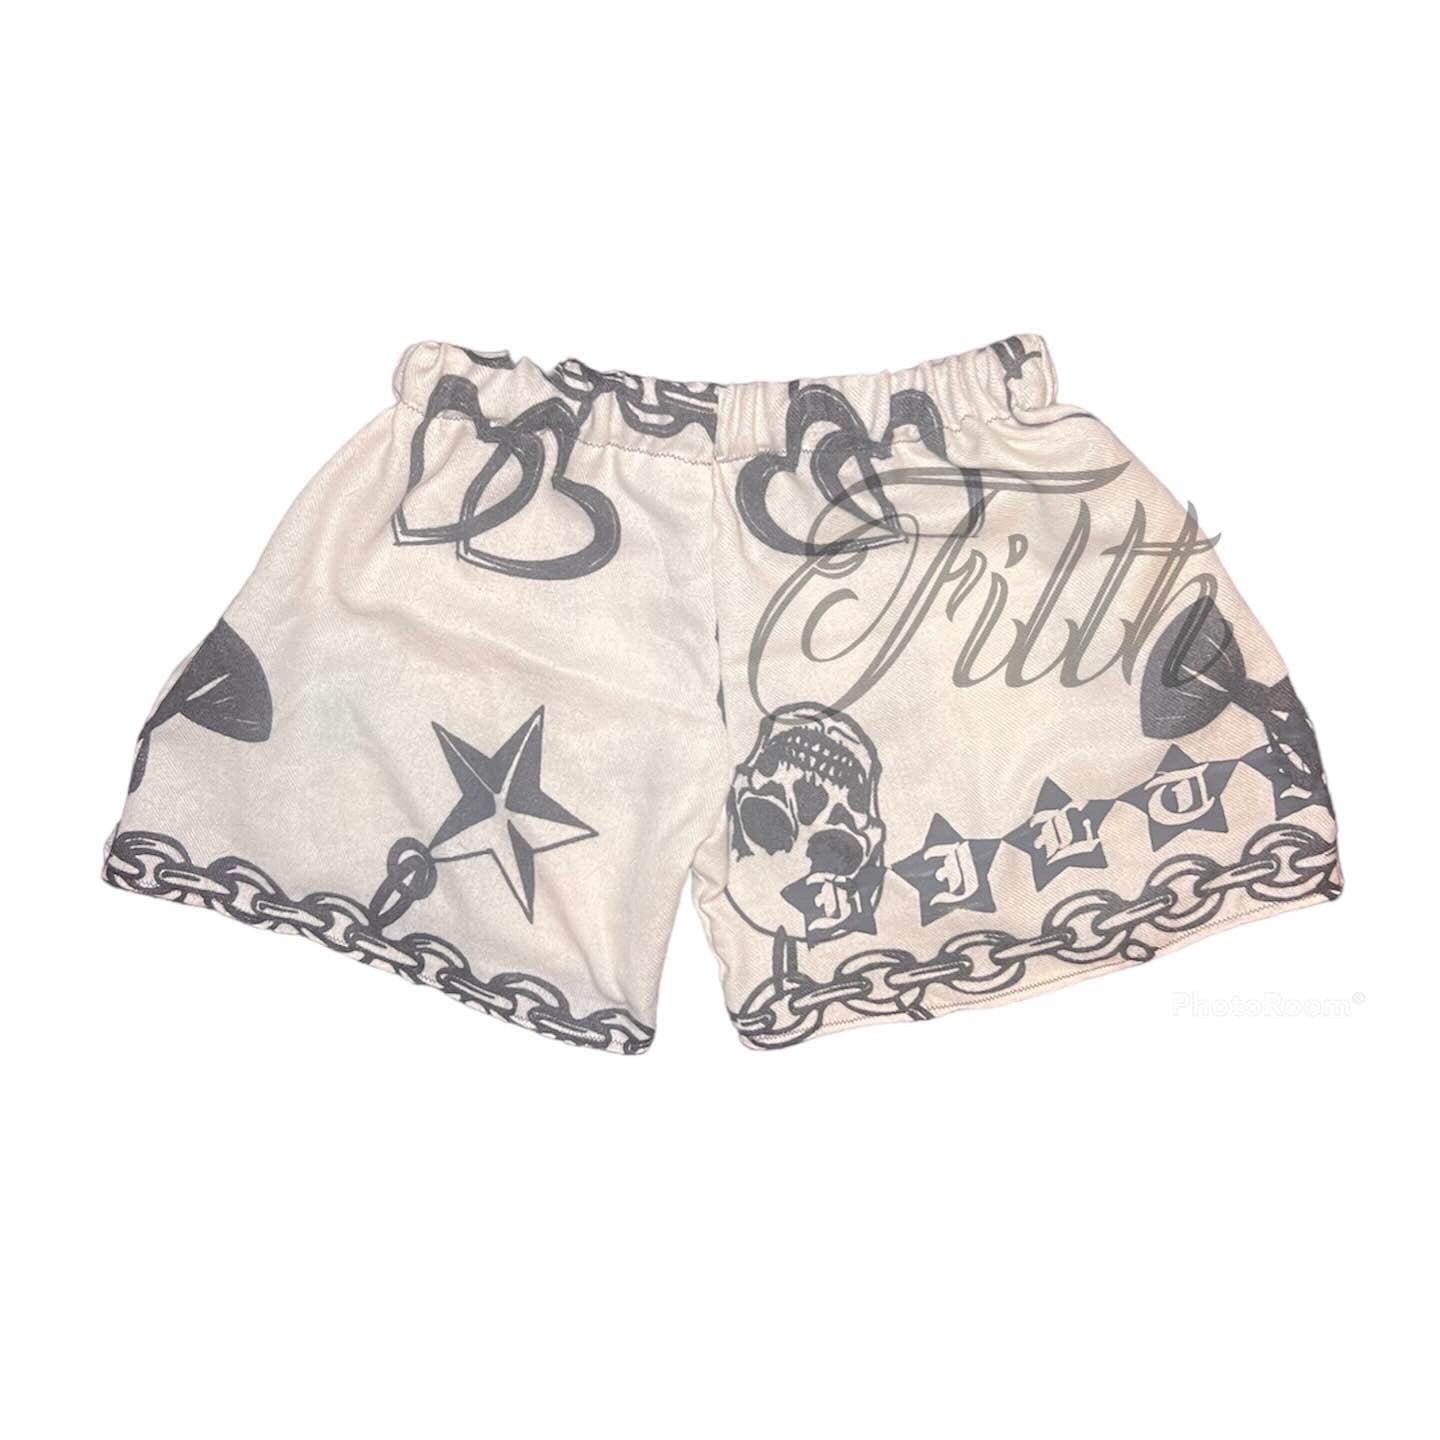 Bowie Scarf Shorts